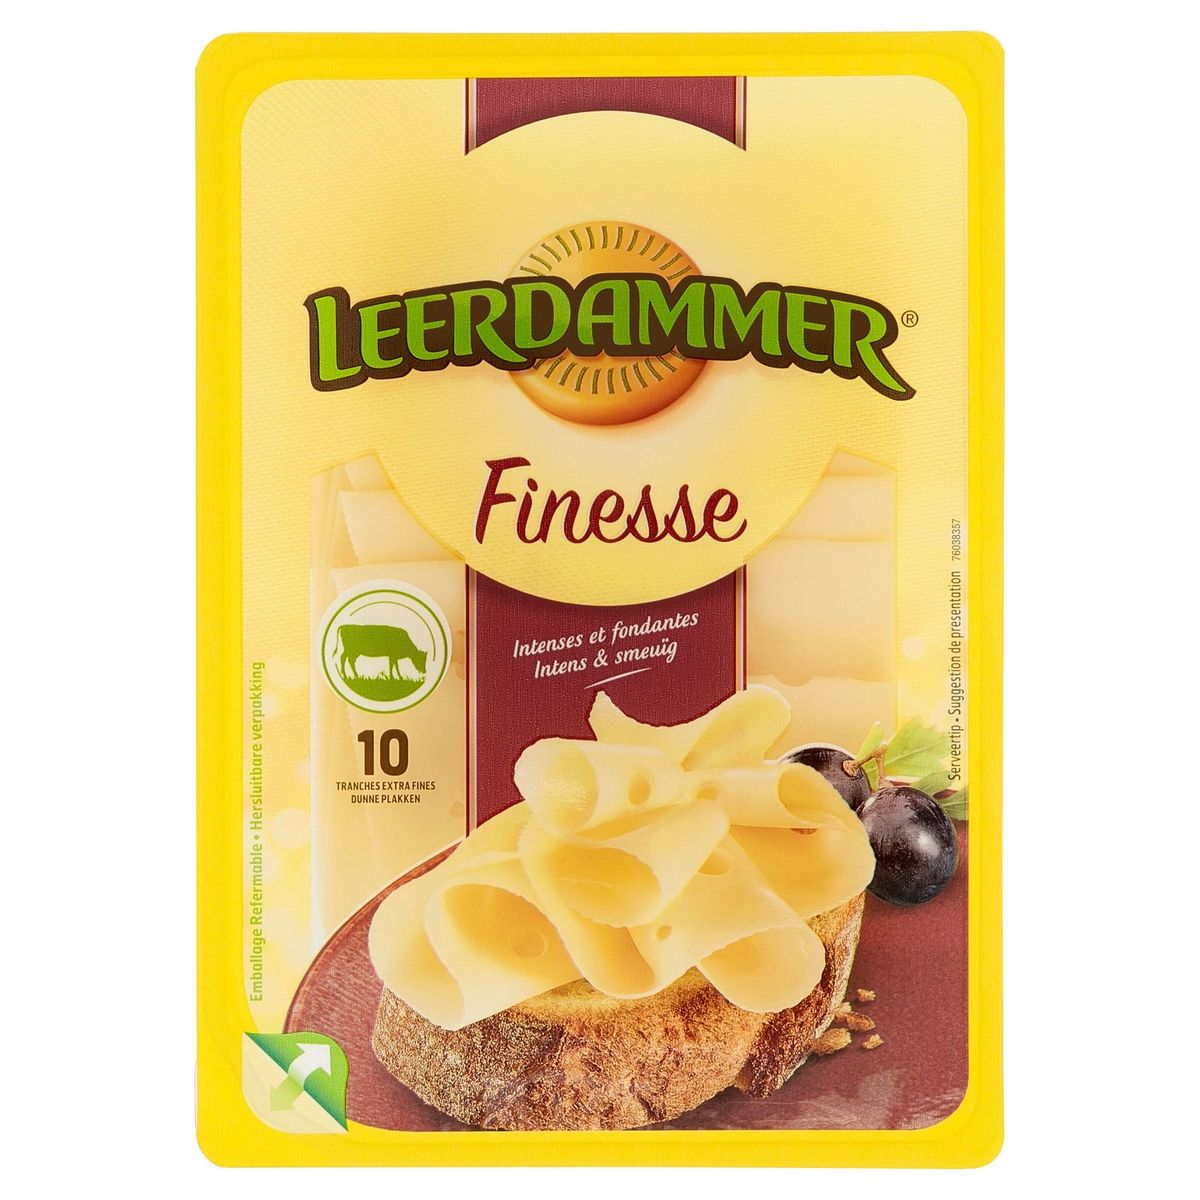 Leerdammer Finesse 10 Tranches Extra Fines 100 g